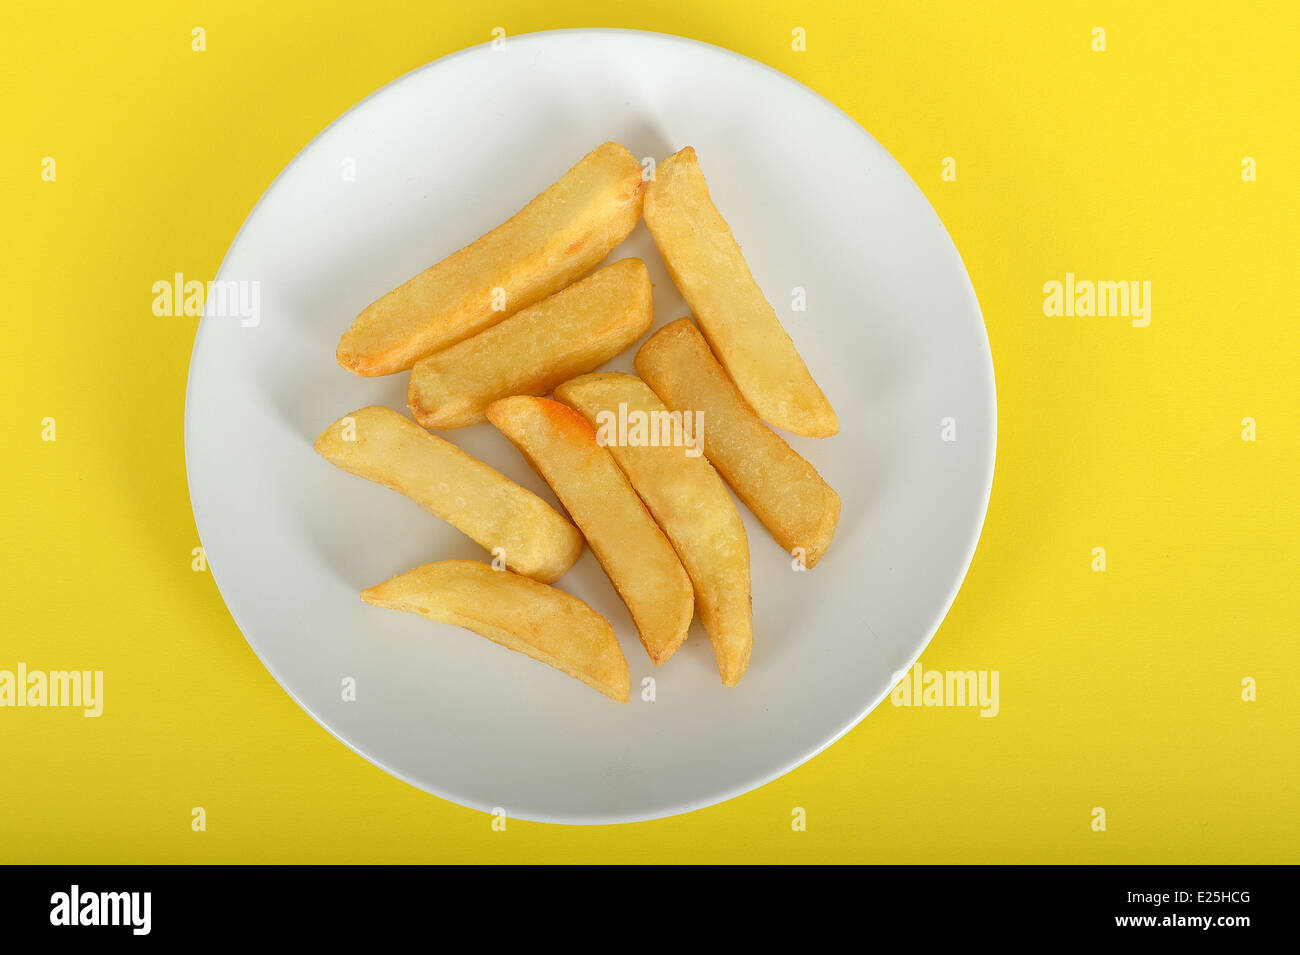 Portion of Chips Providing 100 Calories Stock Photo